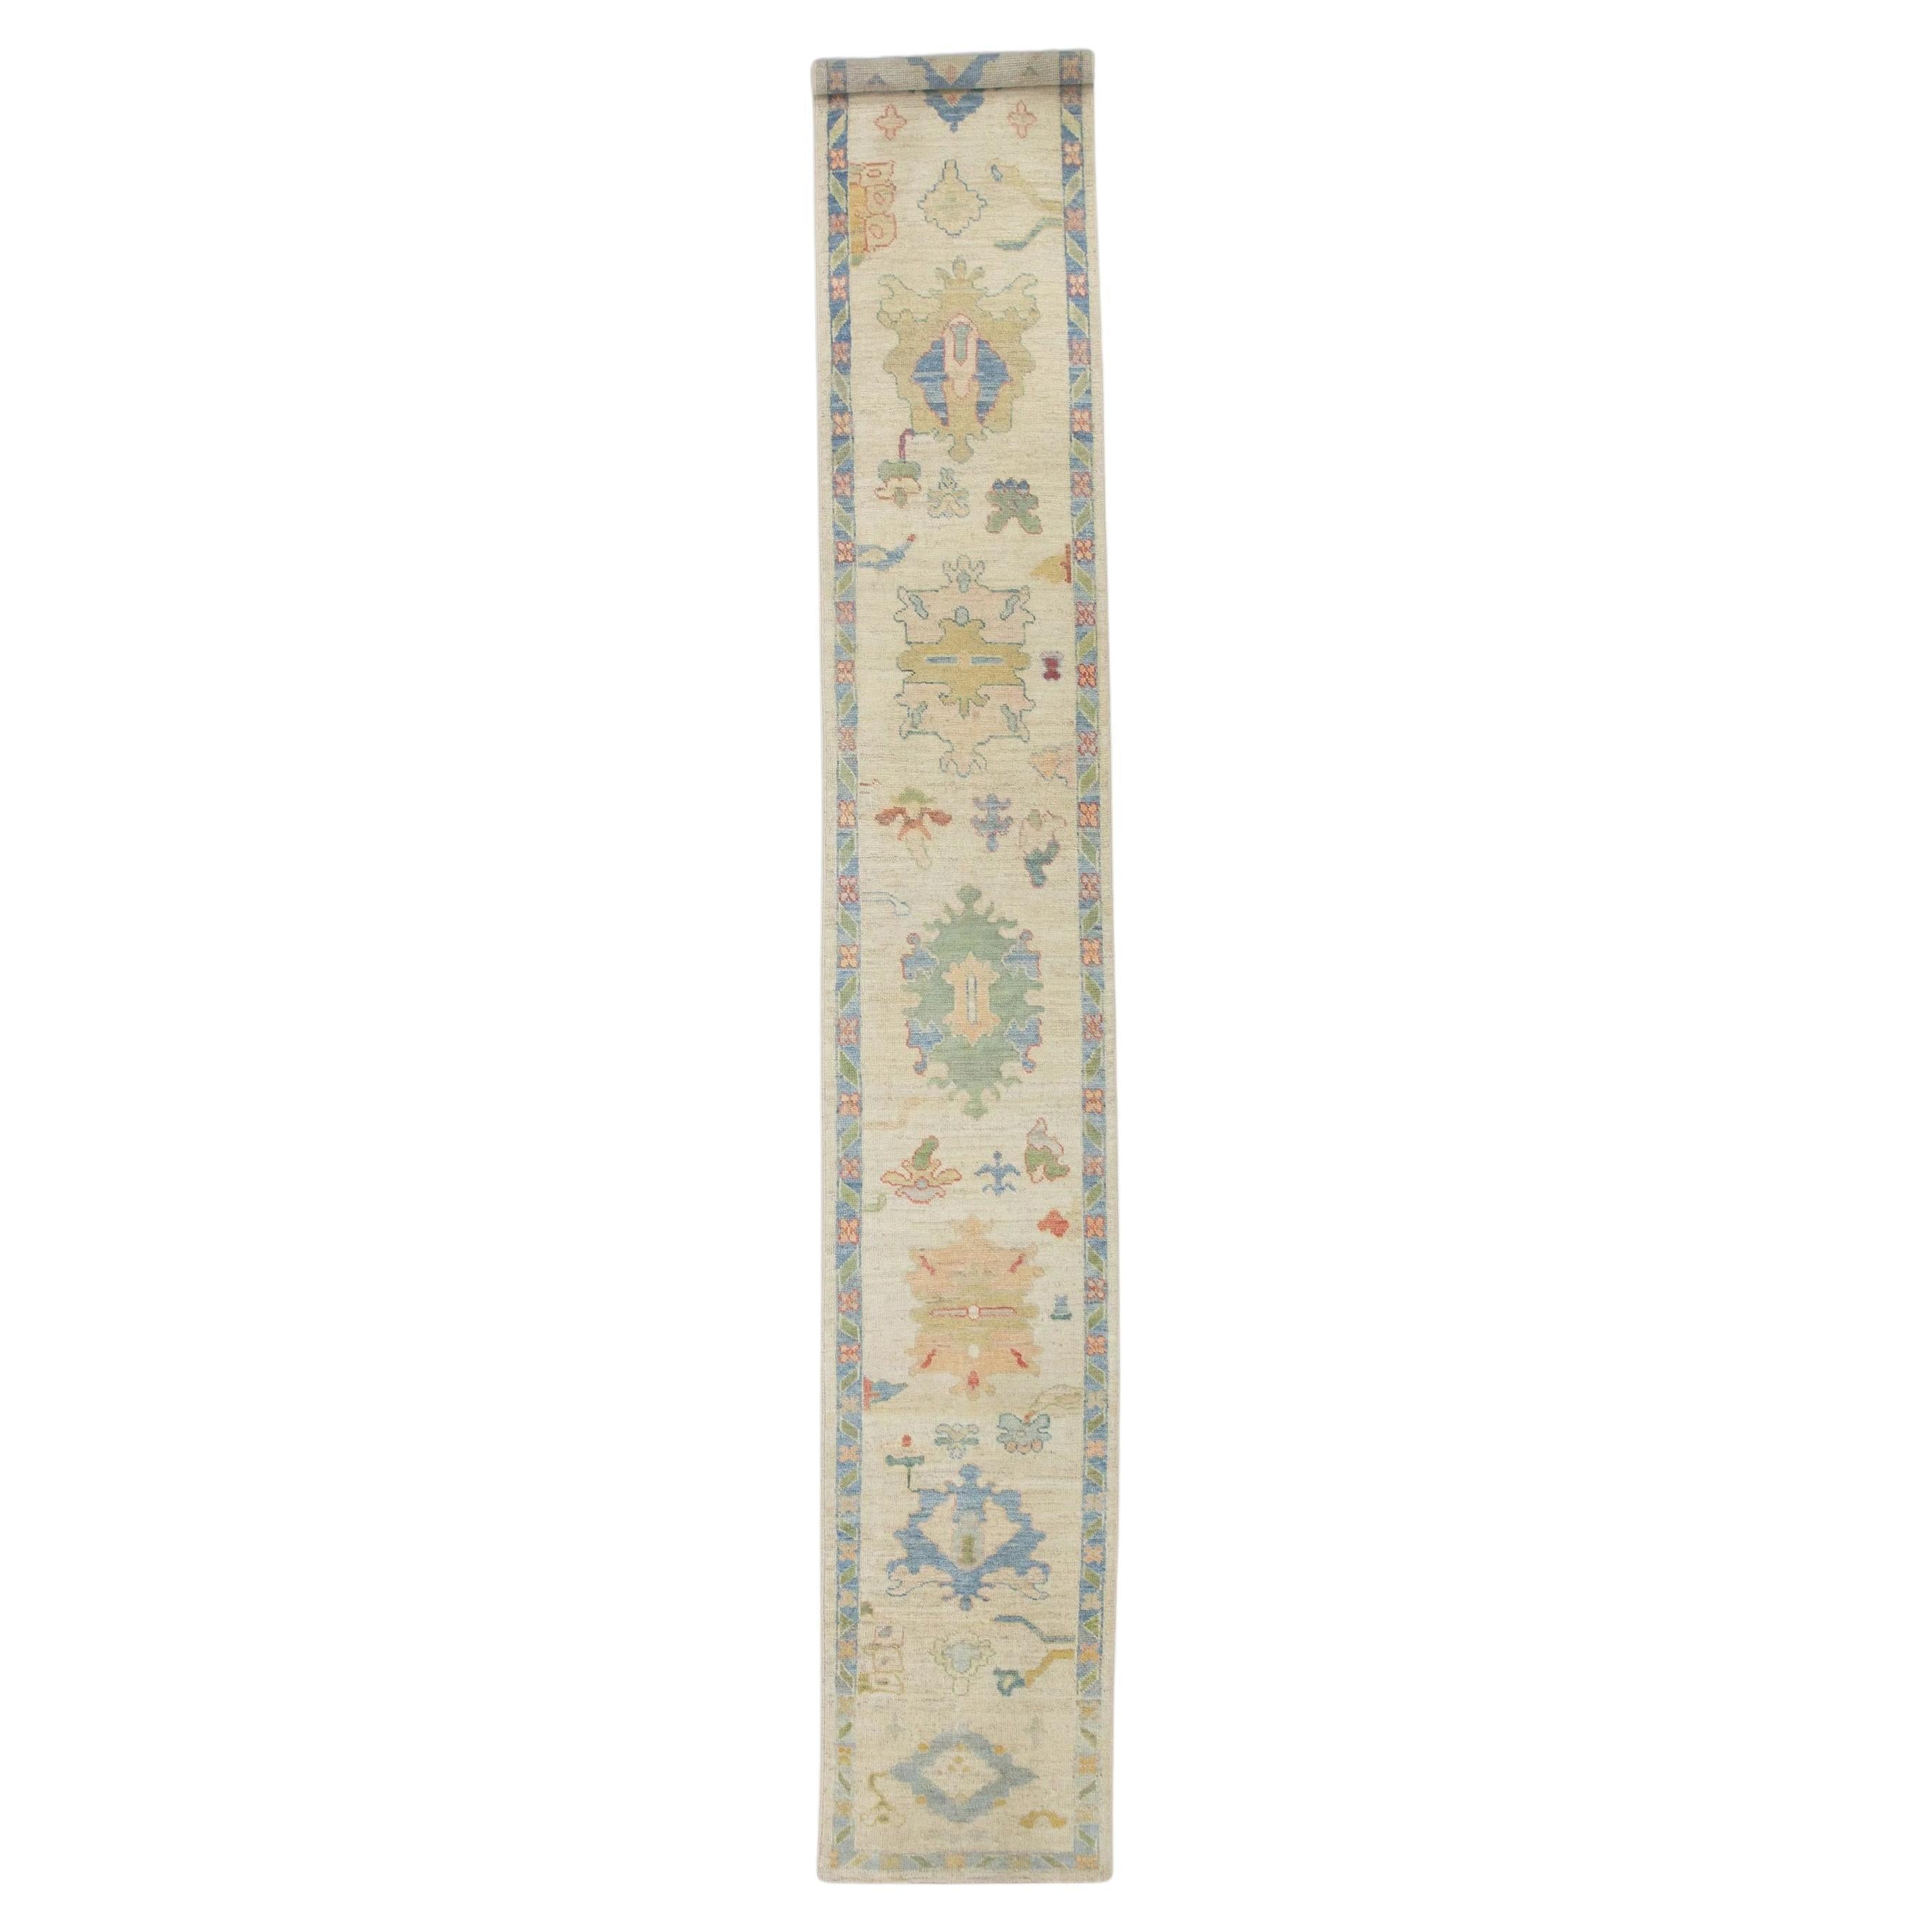 Cream Handwoven Wool Turkish Oushak Runner in Colorful Floral Design 2'7"x17'3"